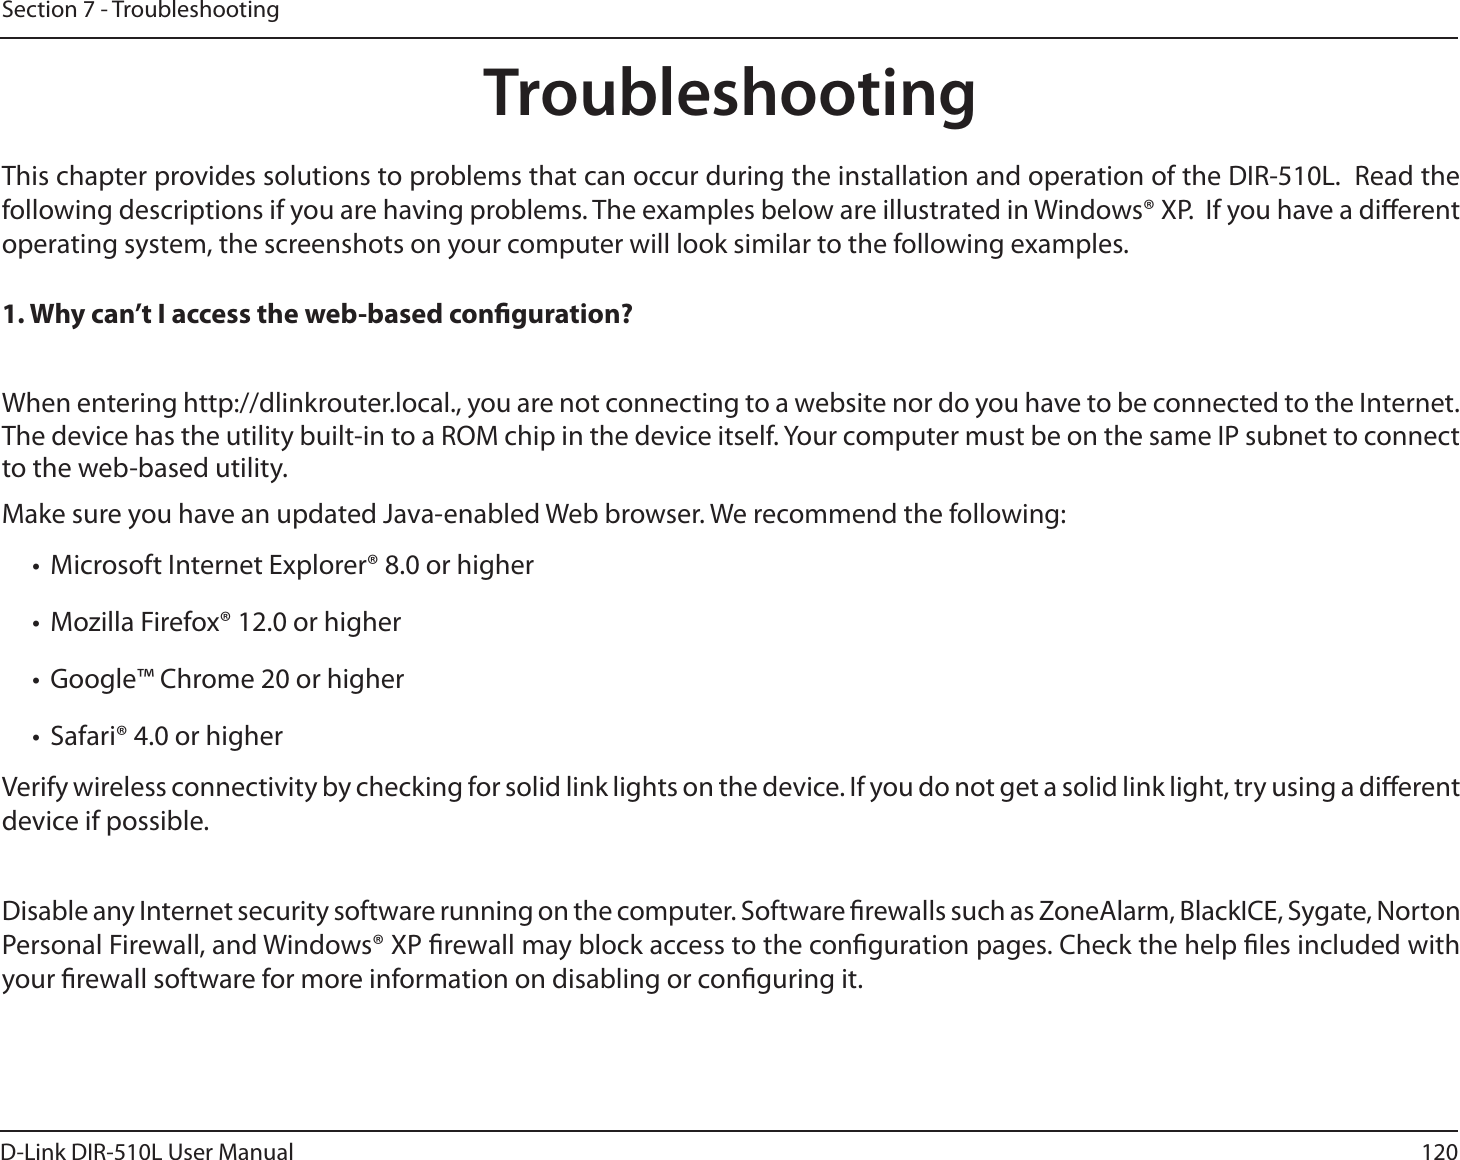 120D-Link DIR-510L User ManualSection 7 - TroubleshootingTroubleshootingThis chapter provides solutions to problems that can occur during the installation and operation of the DIR-510L.  Read the following descriptions if you are having problems. The examples below are illustrated in Windows® XP.  If you have a dierent operating system, the screenshots on your computer will look similar to the following examples.1. Why can’t I access the web-based conguration?When entering http://dlinkrouter.local., you are not connecting to a website nor do you have to be connected to the Internet. The device has the utility built-in to a ROM chip in the device itself. Your computer must be on the same IP subnet to connect to the web-based utility. Make sure you have an updated Java-enabled Web browser. We recommend the following: t Microsoft Internet Explorer® 8.0 or highert Mozilla Firefox® 12.0 or highert Google™ Chrome 20 or highert Safari® 4.0 or higherVerify wireless connectivity by checking for solid link lights on the device. If you do not get a solid link light, try using a dierent device if possible.Disable any Internet security software running on the computer. Software rewalls such as ZoneAlarm, BlackICE, Sygate, Norton Personal Firewall, and Windows® XP rewall may block access to the conguration pages. Check the help les included with your rewall software for more information on disabling or conguring it.